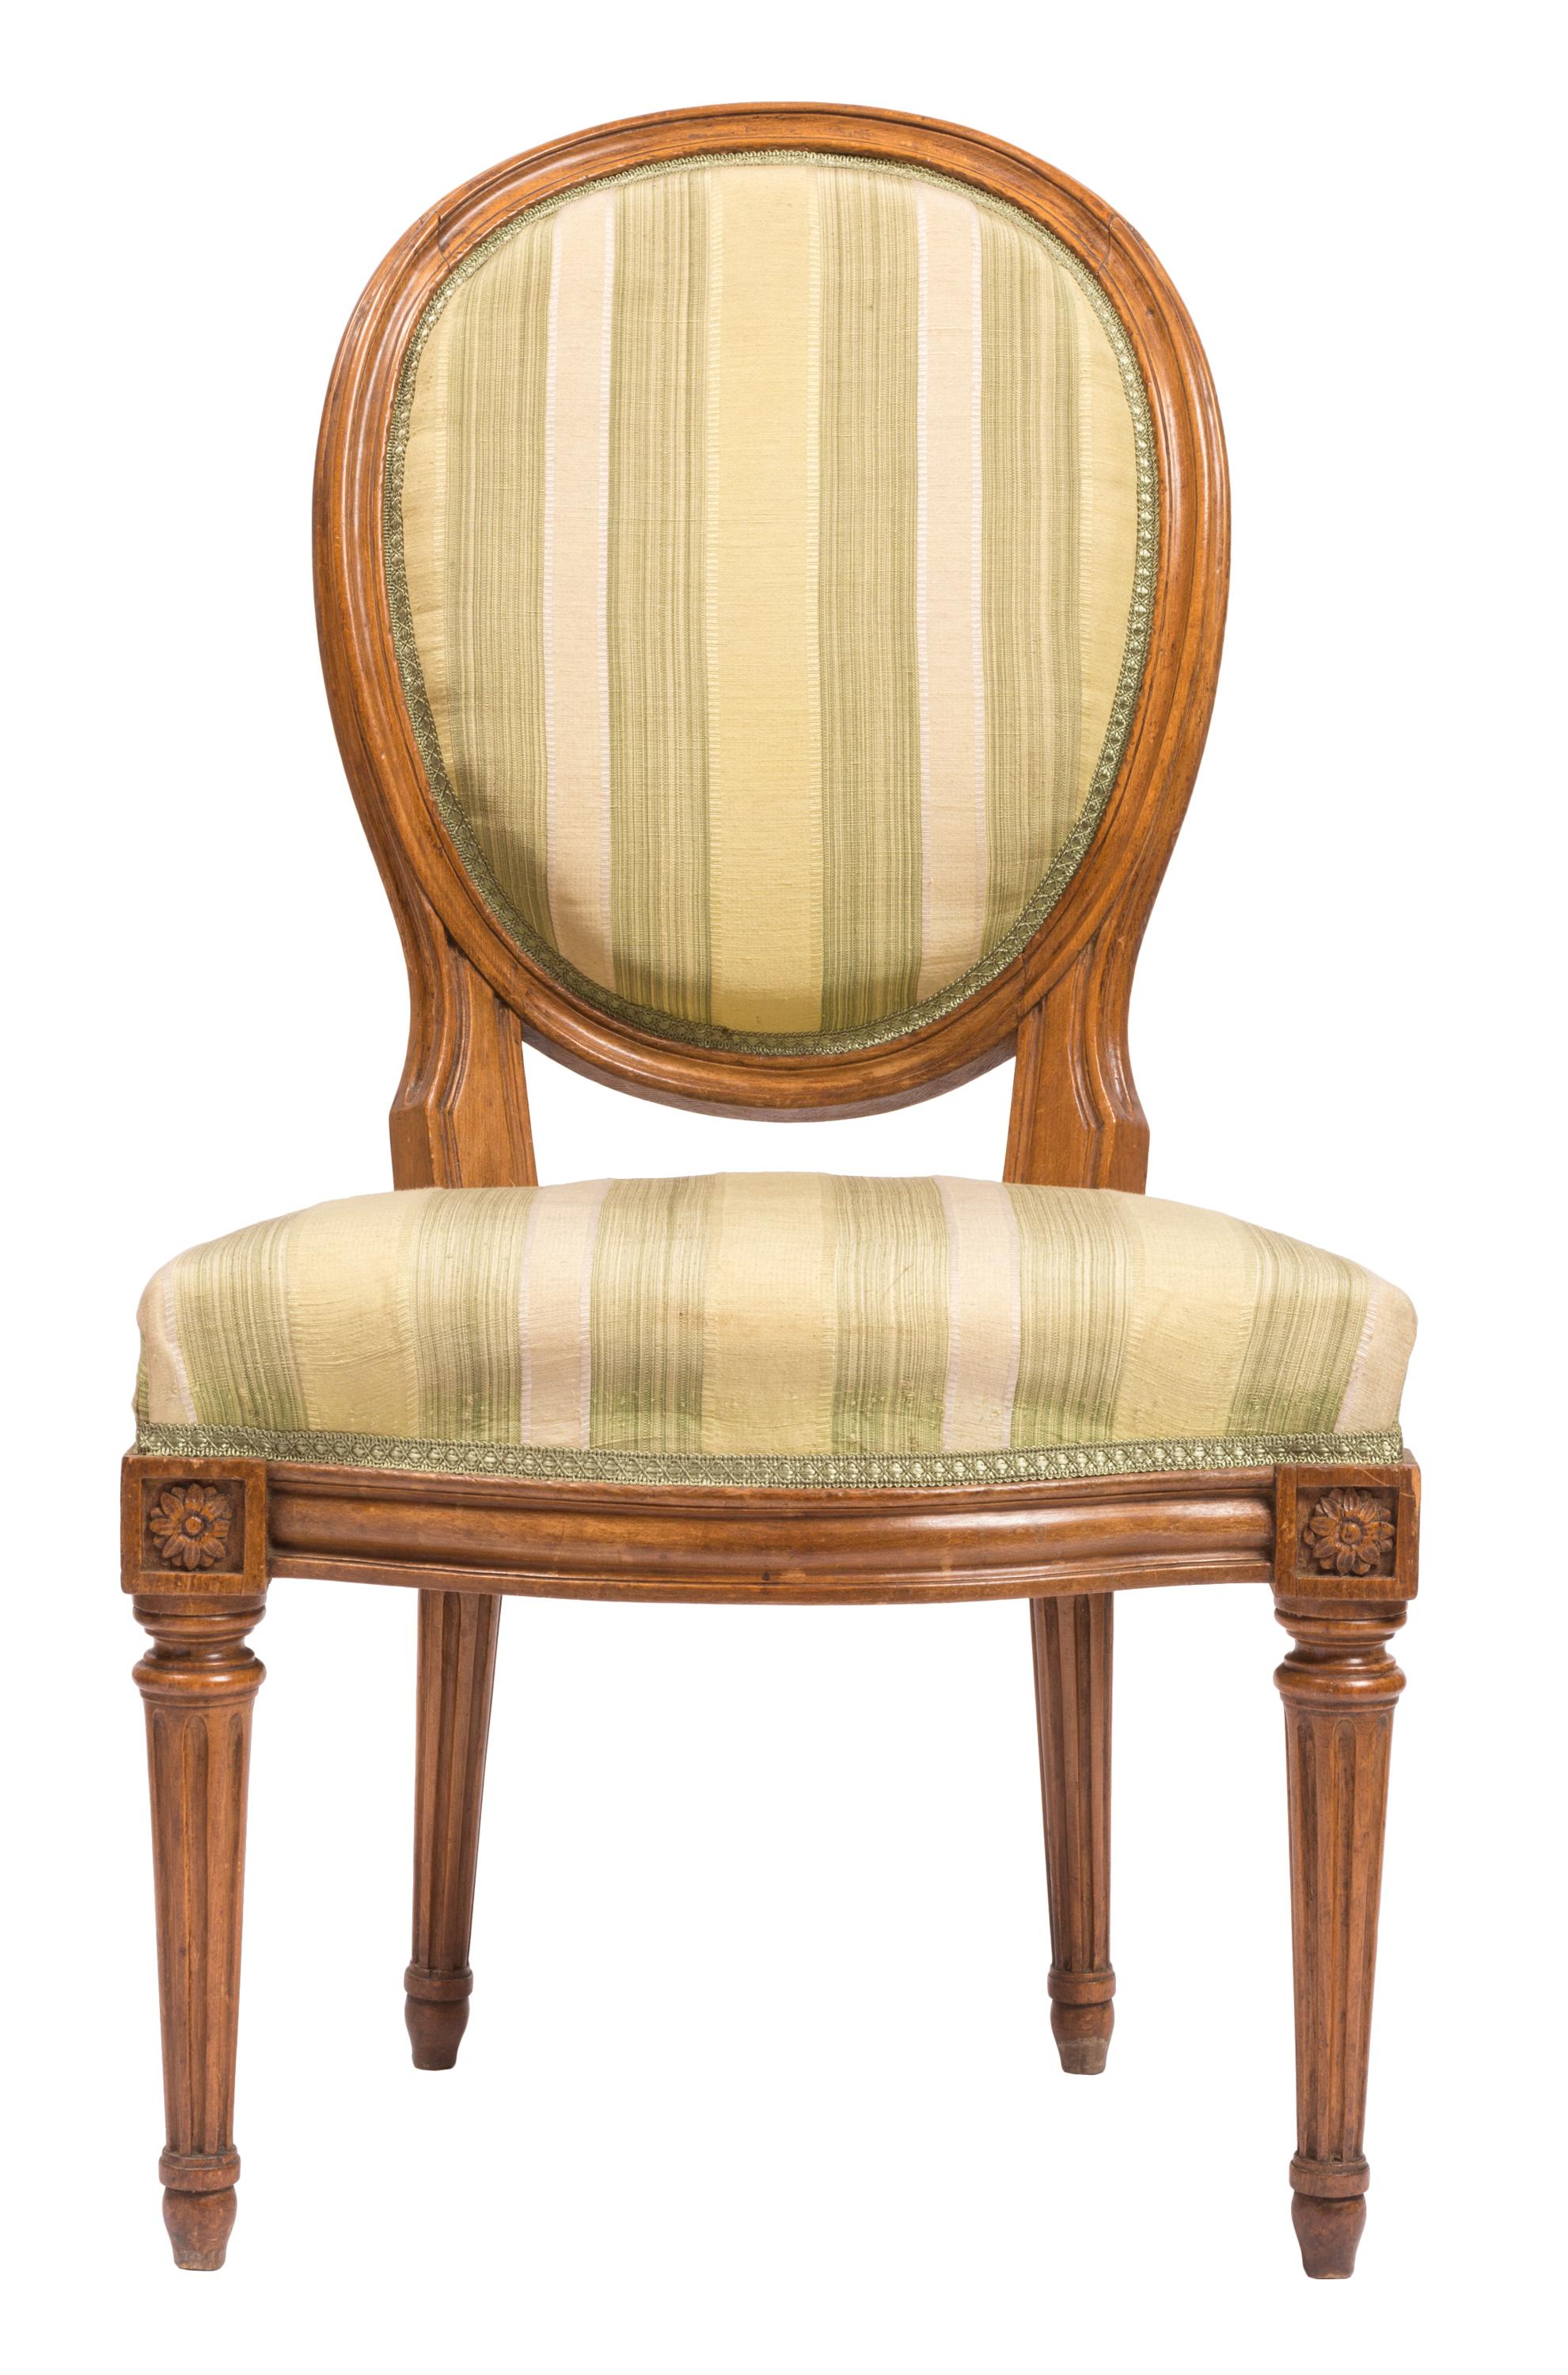 Set of Four Louis XVI Style Chairs with Striped Silk Upholstery, 19th Century For Sale 4